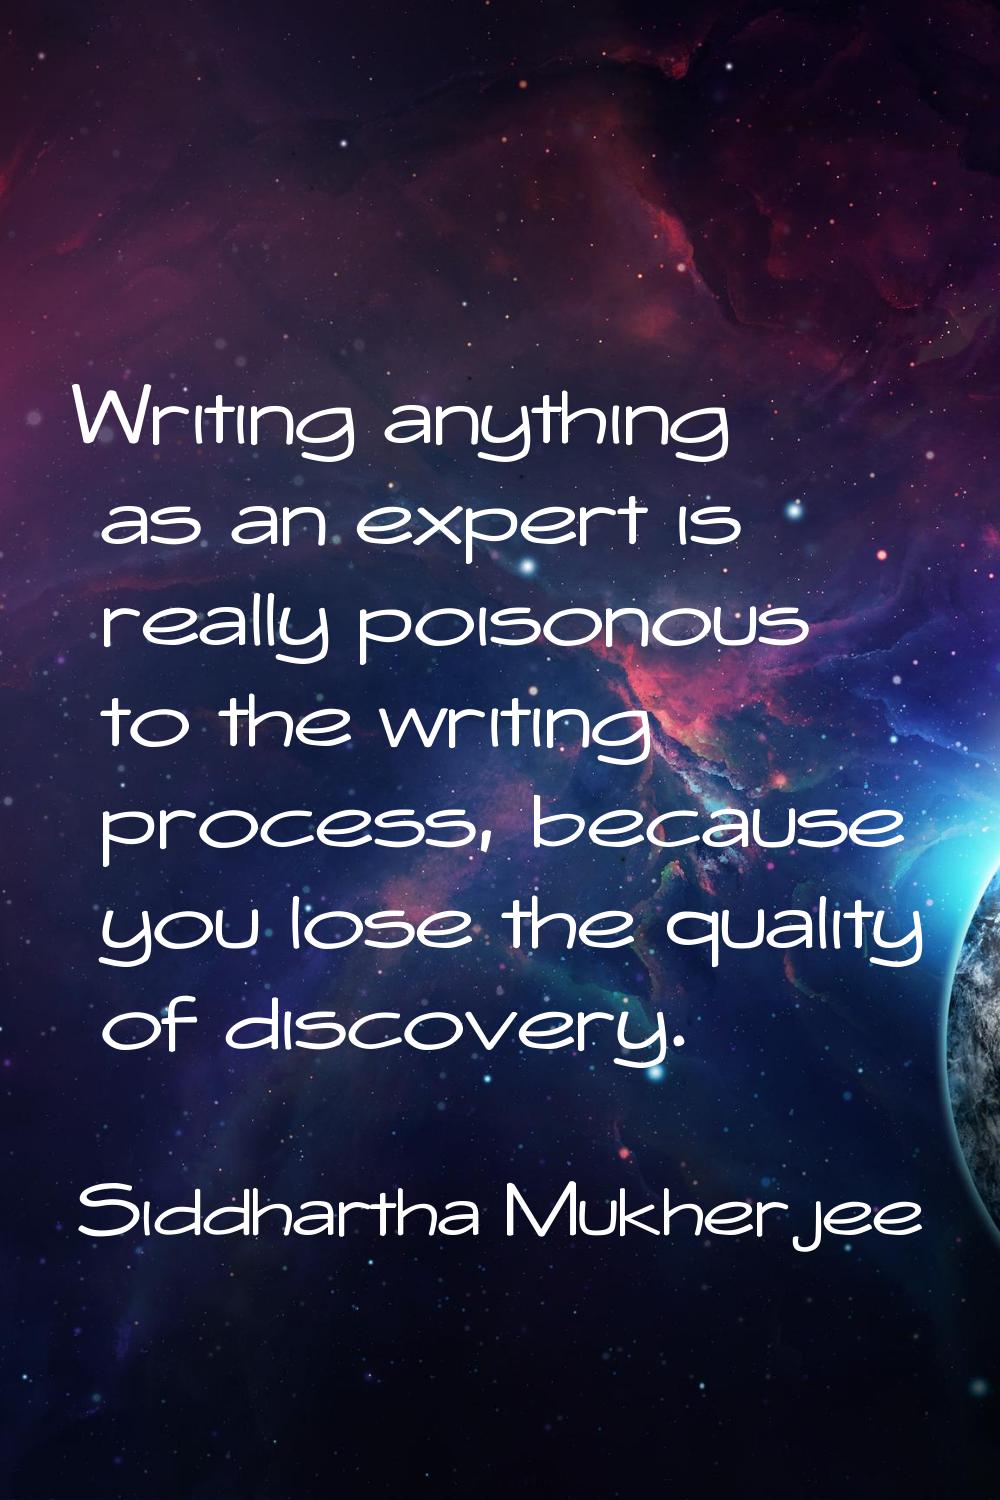 Writing anything as an expert is really poisonous to the writing process, because you lose the qual